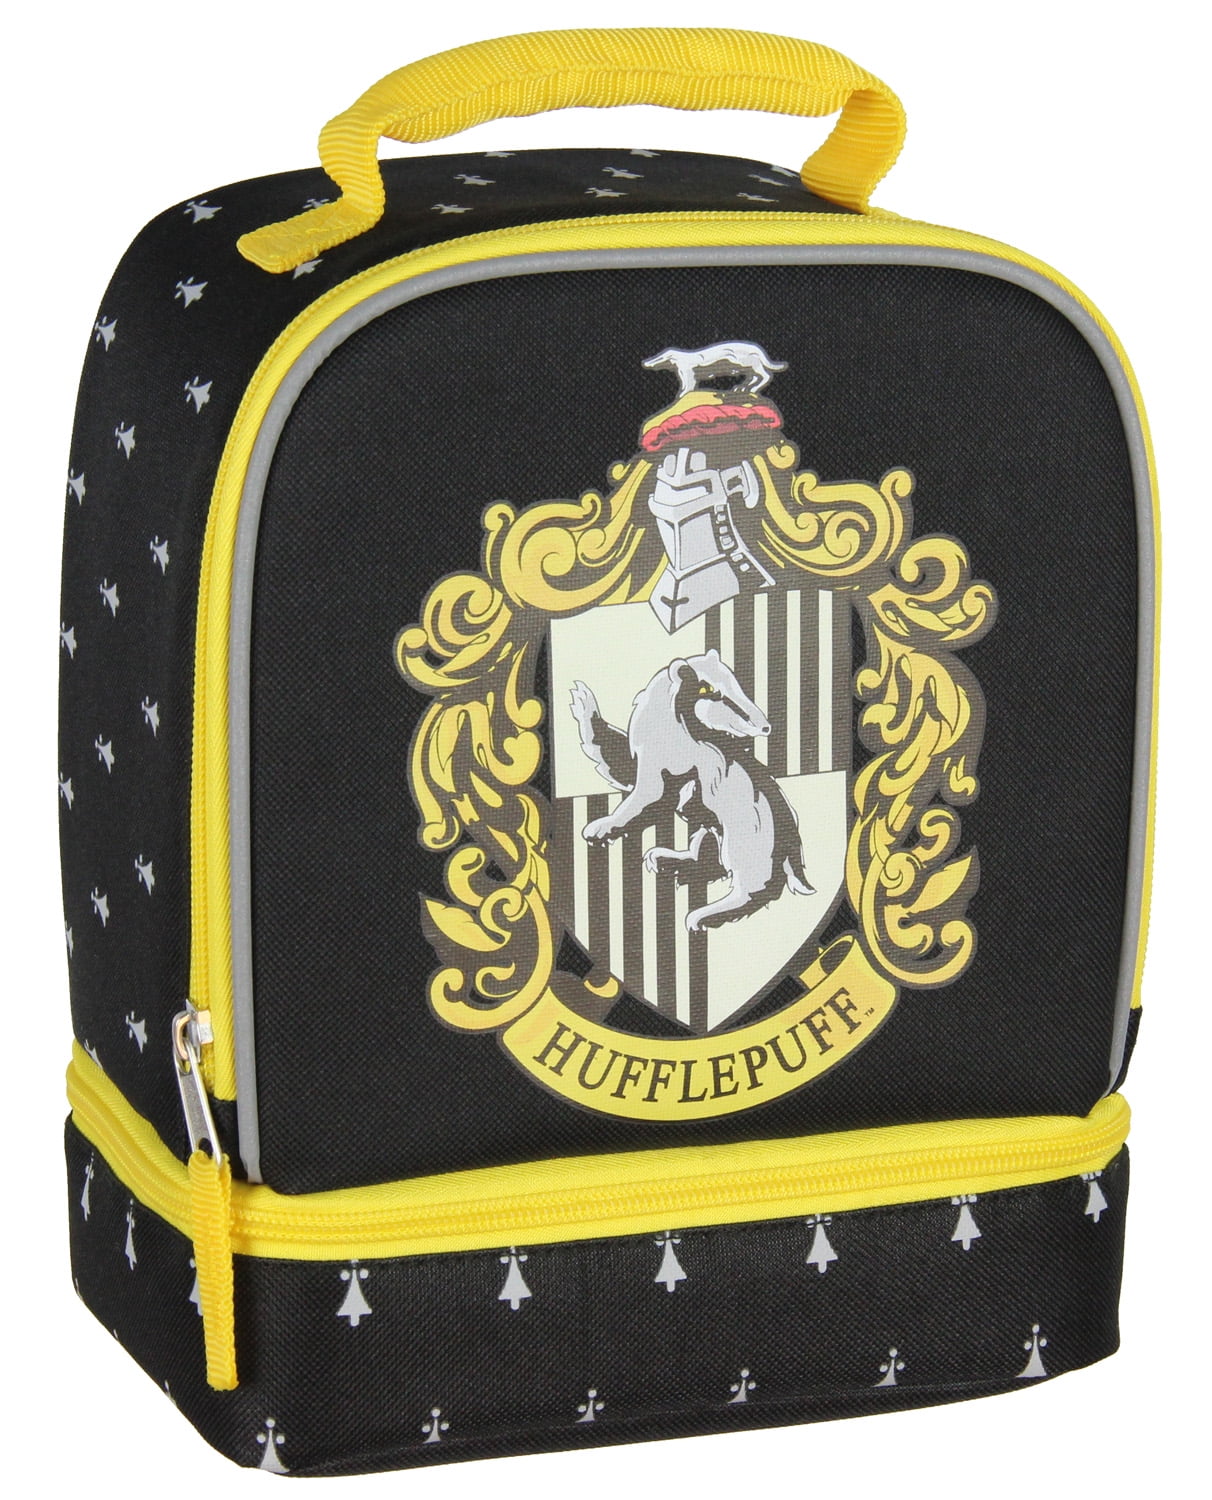 Harry Potter Hufflepuff Crest Dual Compartment Lunch Bag Tote 